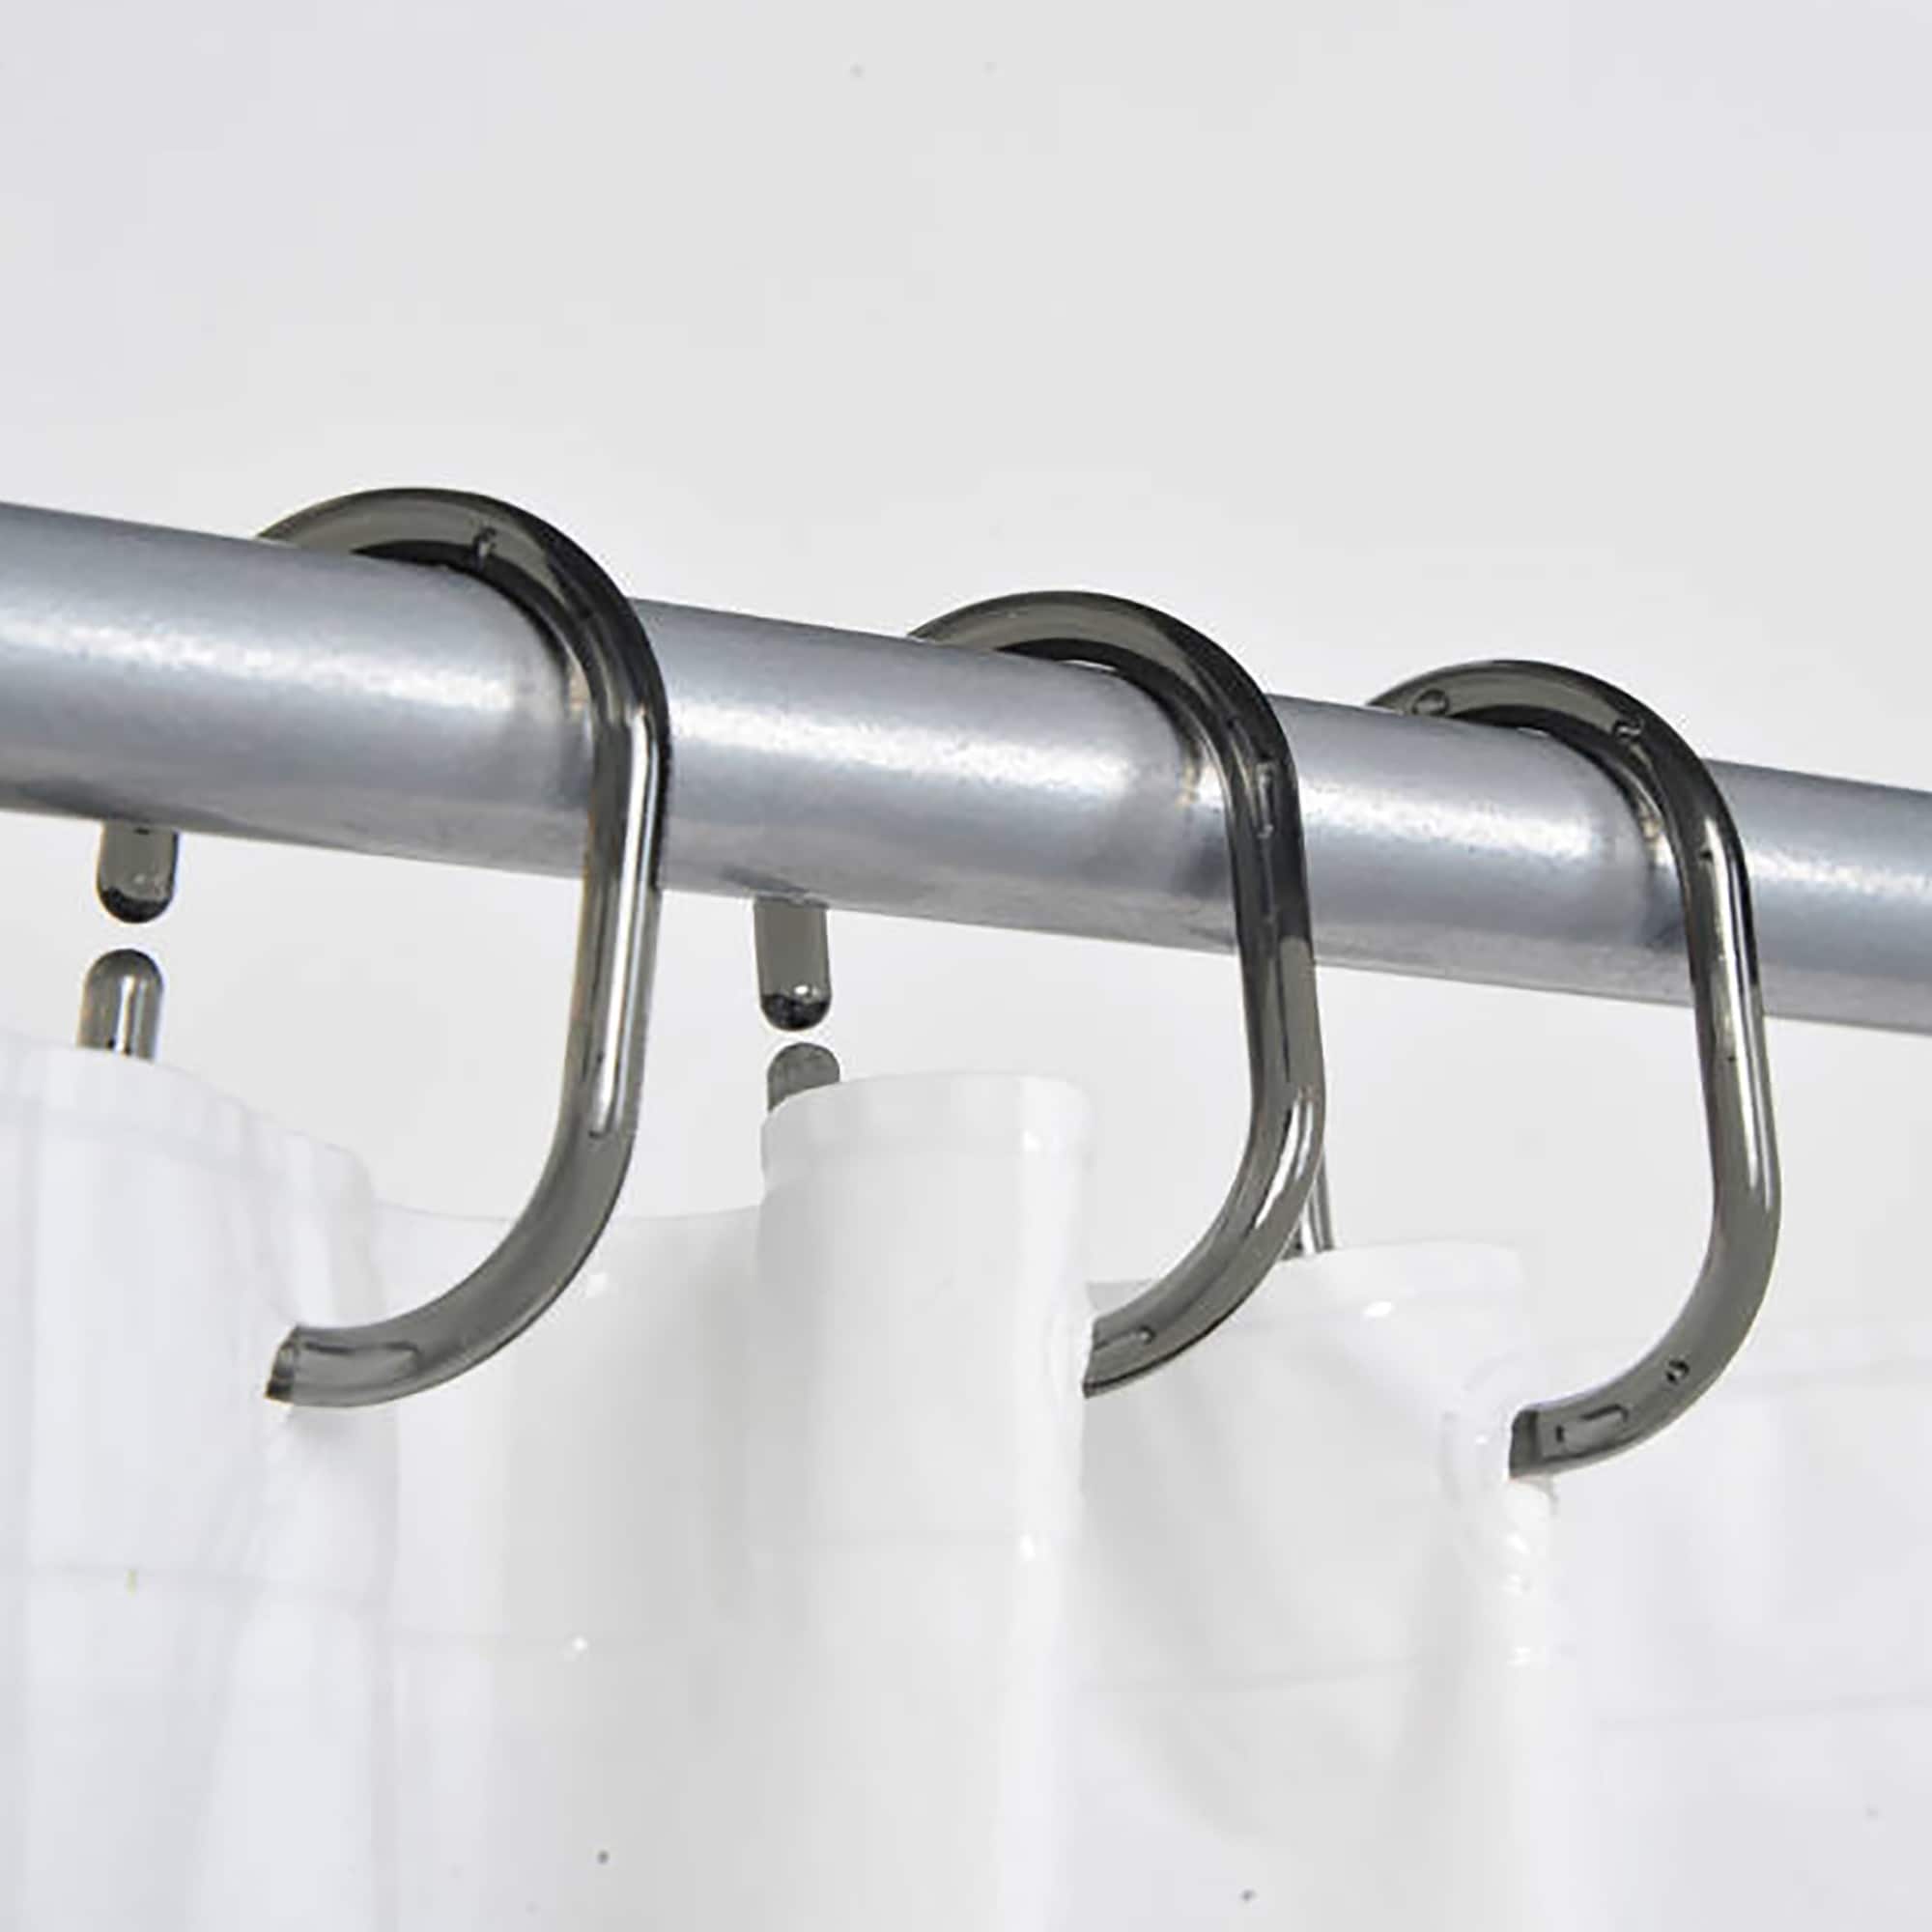 Bath Bliss 12 Pack Shower Curtain with Double Hooks in Chrome